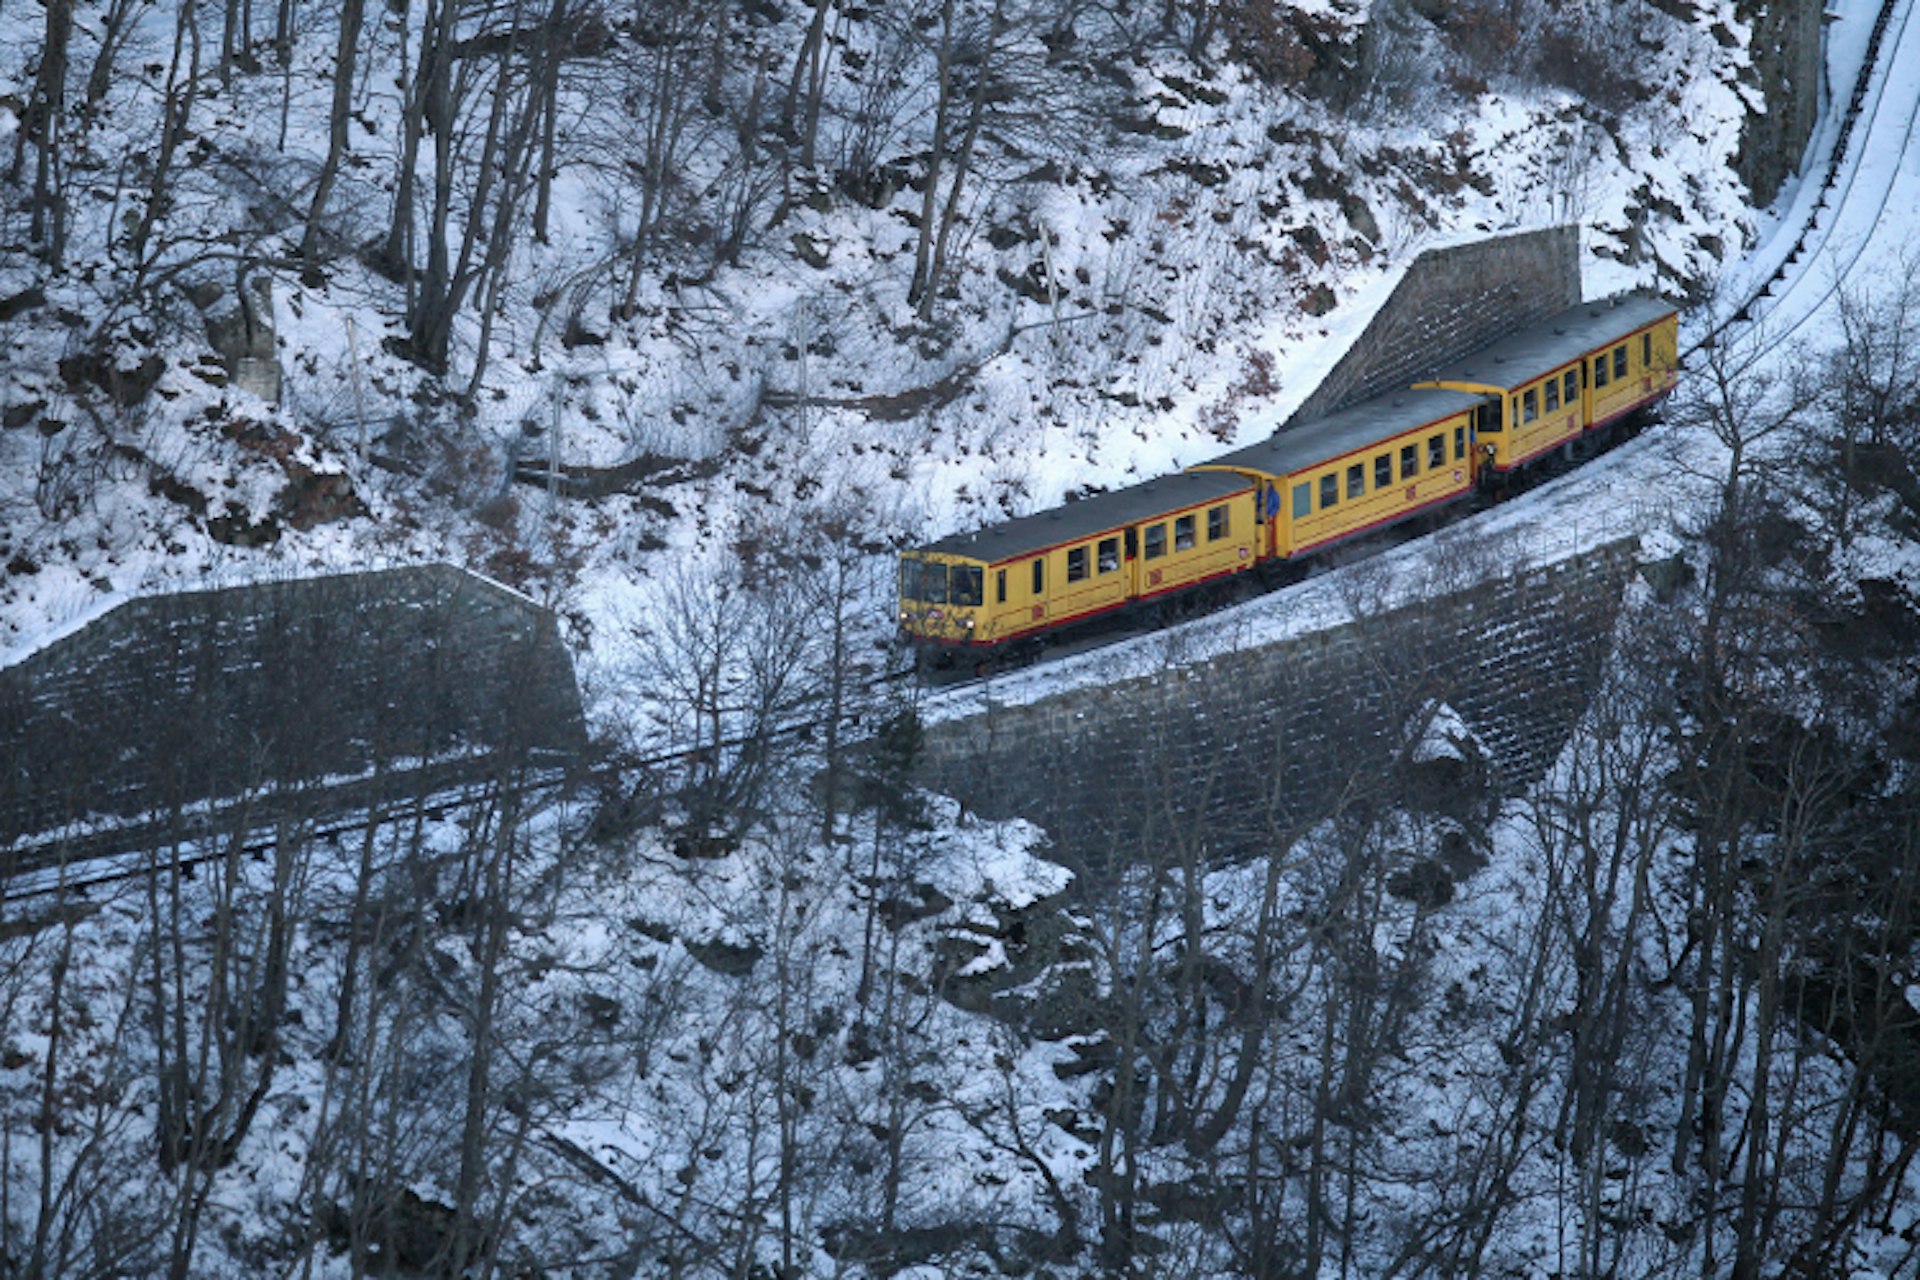 Journey through the French Pyrenees on Le Train Jaune (AKA The Canary). Image by Raymond Roig/Photostock Getty.